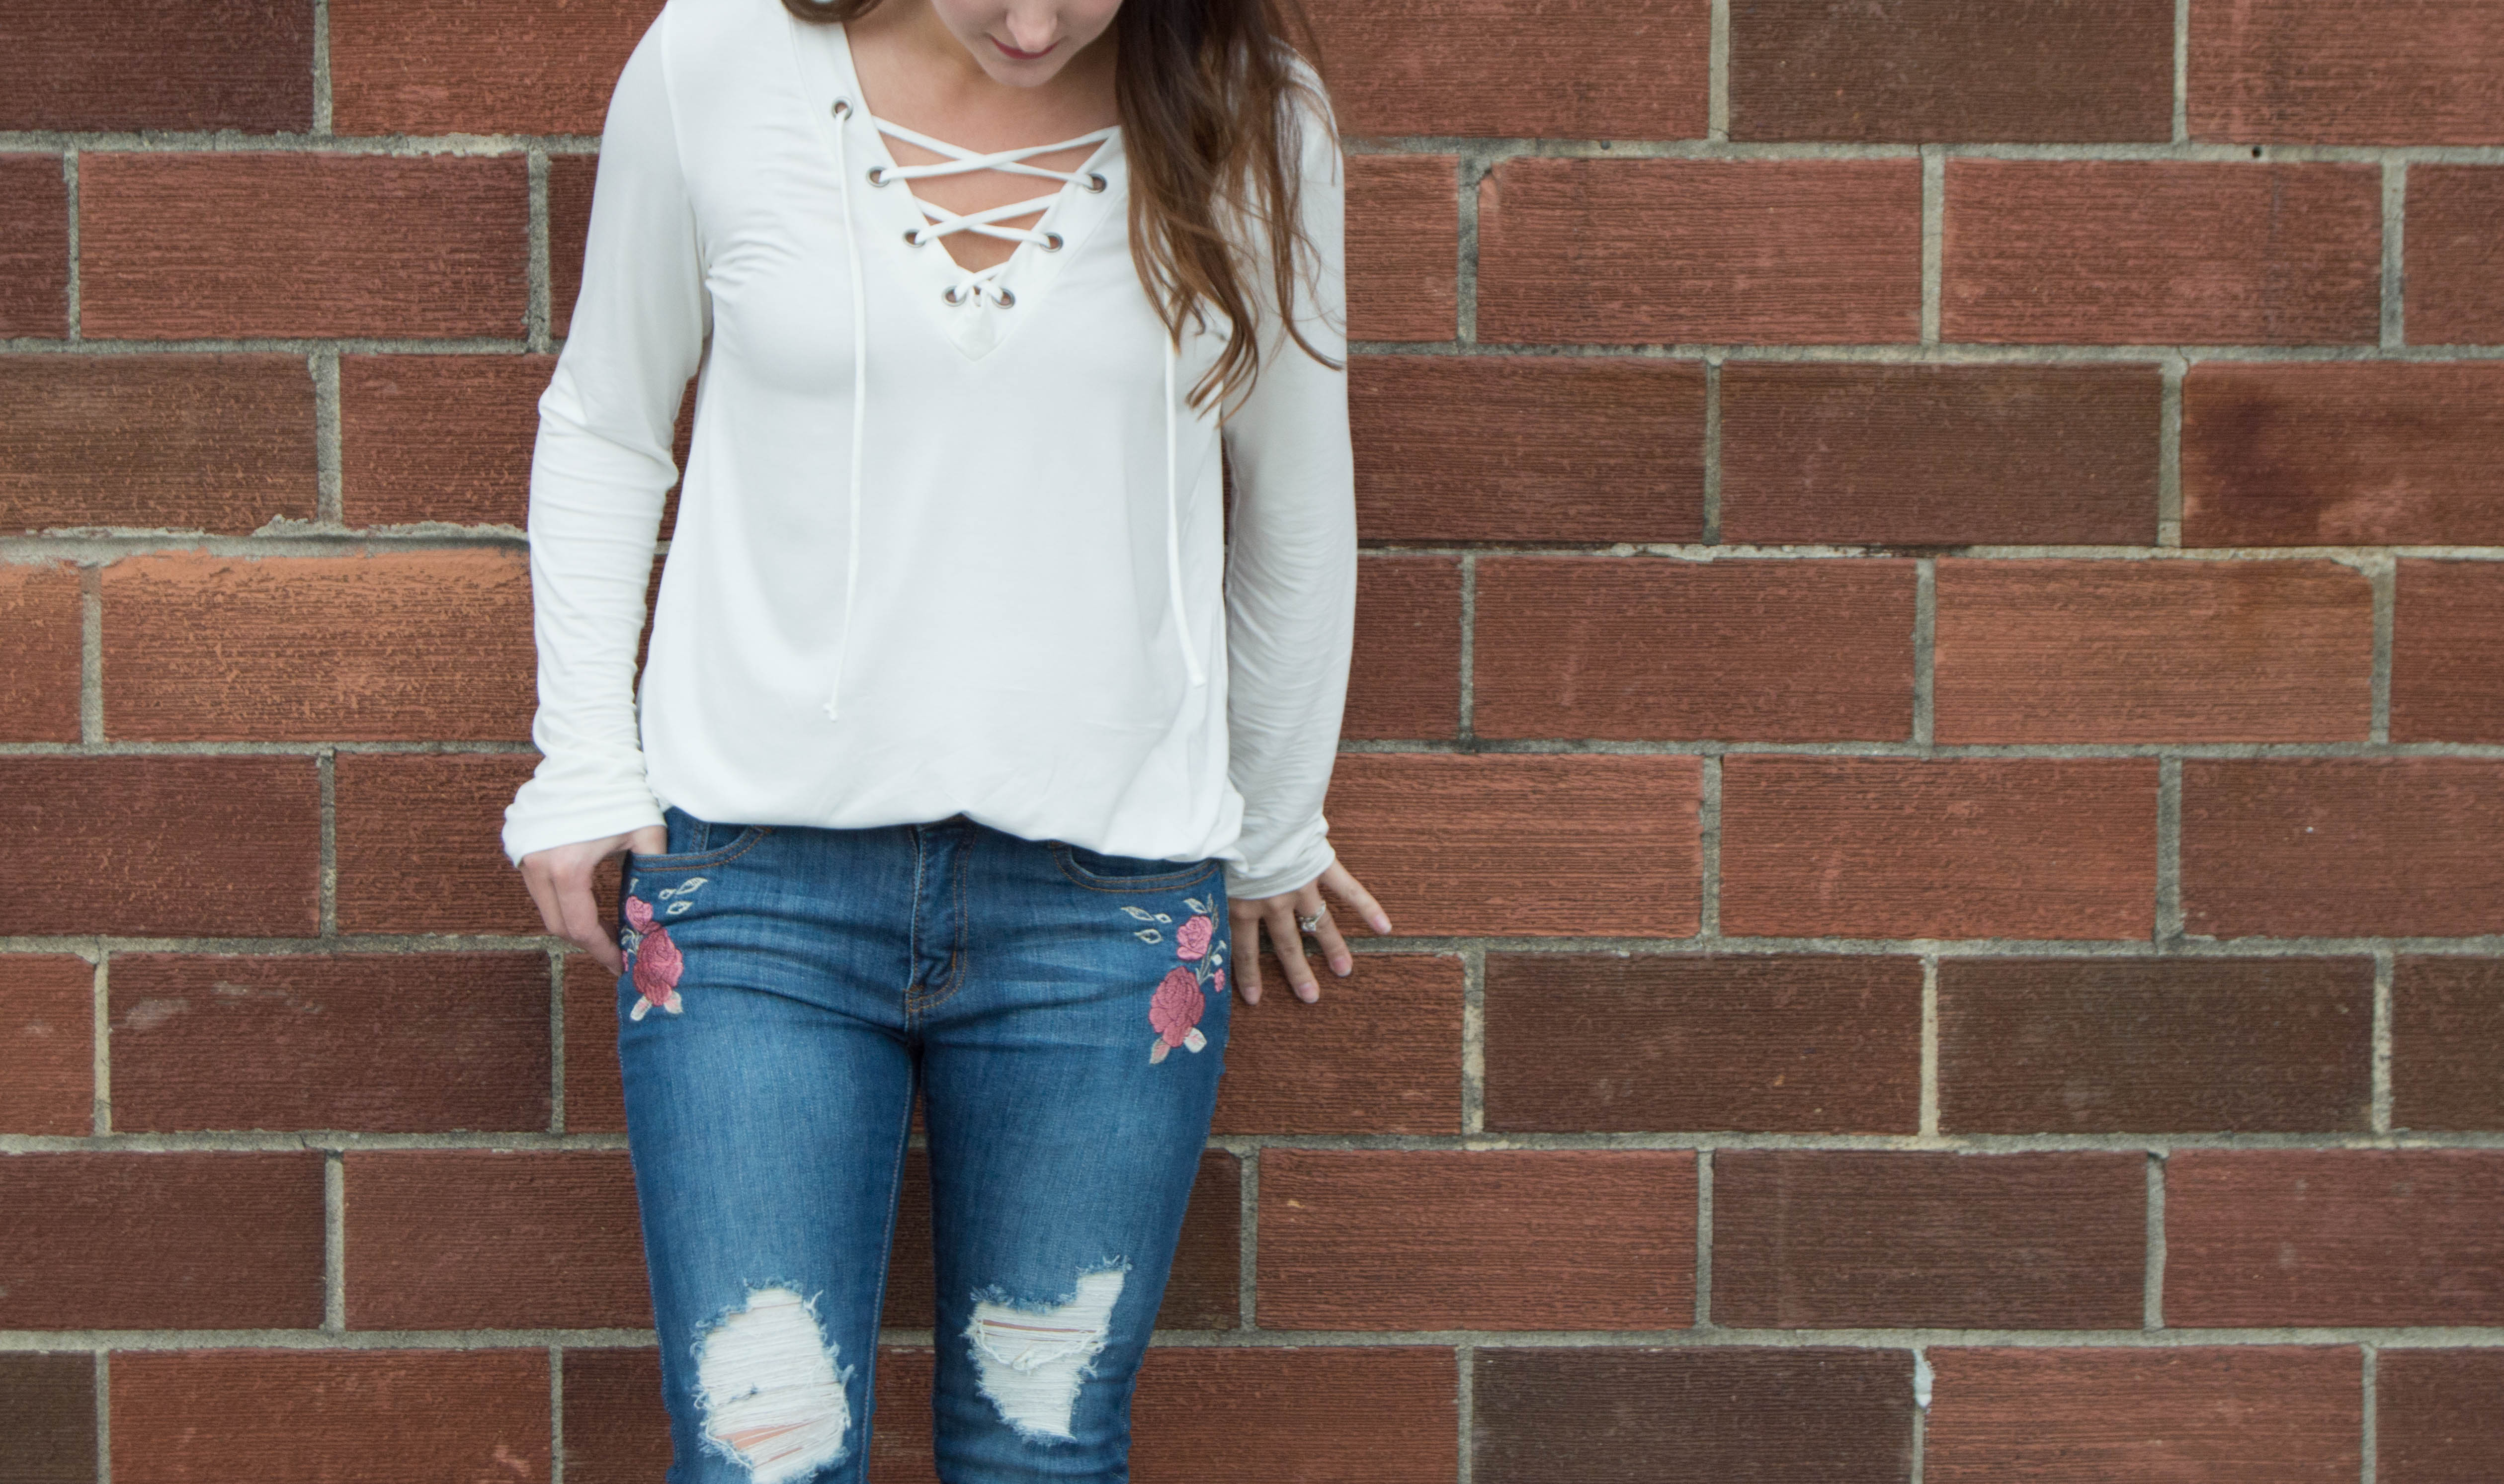 Embroidered Jeans + Lace Up Top - LuLus